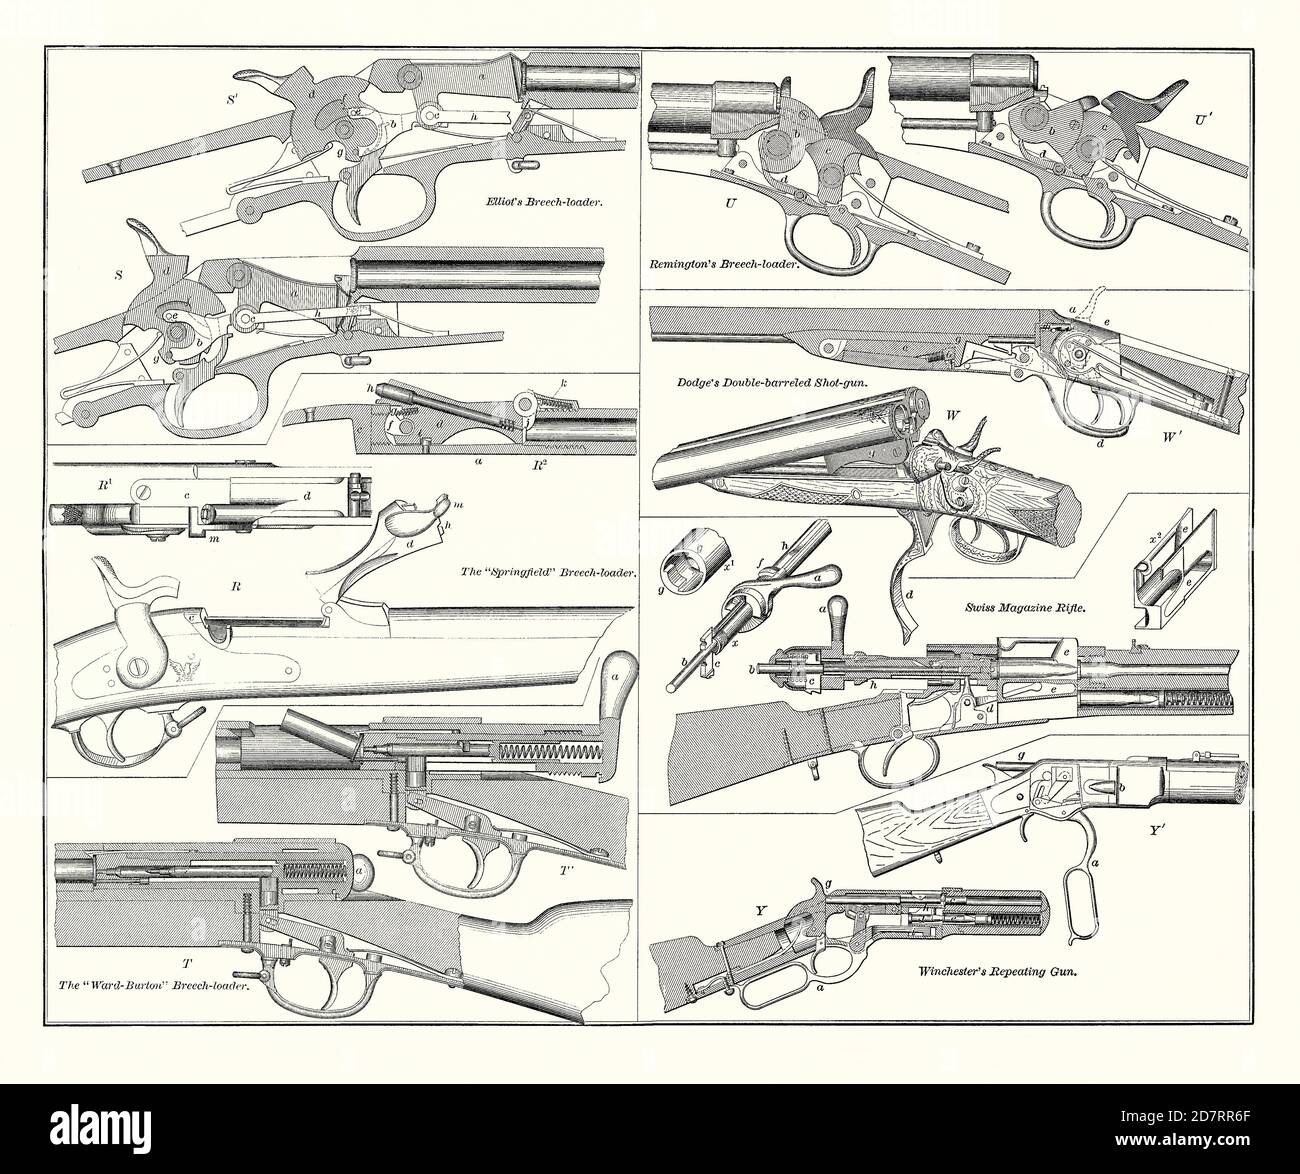 An old engraving showing various breech-loading firearms of the1800s. It is from a Victorian mechanical engineering book of the 1880s. Illustrated are the inside workings of Elliot’s Breech-loader (B-l), The Springfield B-l, Ward Burton B-l, Remington’s B-l, Dodge’s Double-barreled Shotgun, A Swiss Magazine rifle and Winchester’s B-l. A breechloading gun is a weapon in which the ammunition (cartridge or shell) is loaded at the rear (breech) end of its barrel, as opposed to a muzzleloader, which loads ammunition at the front (muzzle) end. Modern firearms are usually breech-loading. Stock Photo